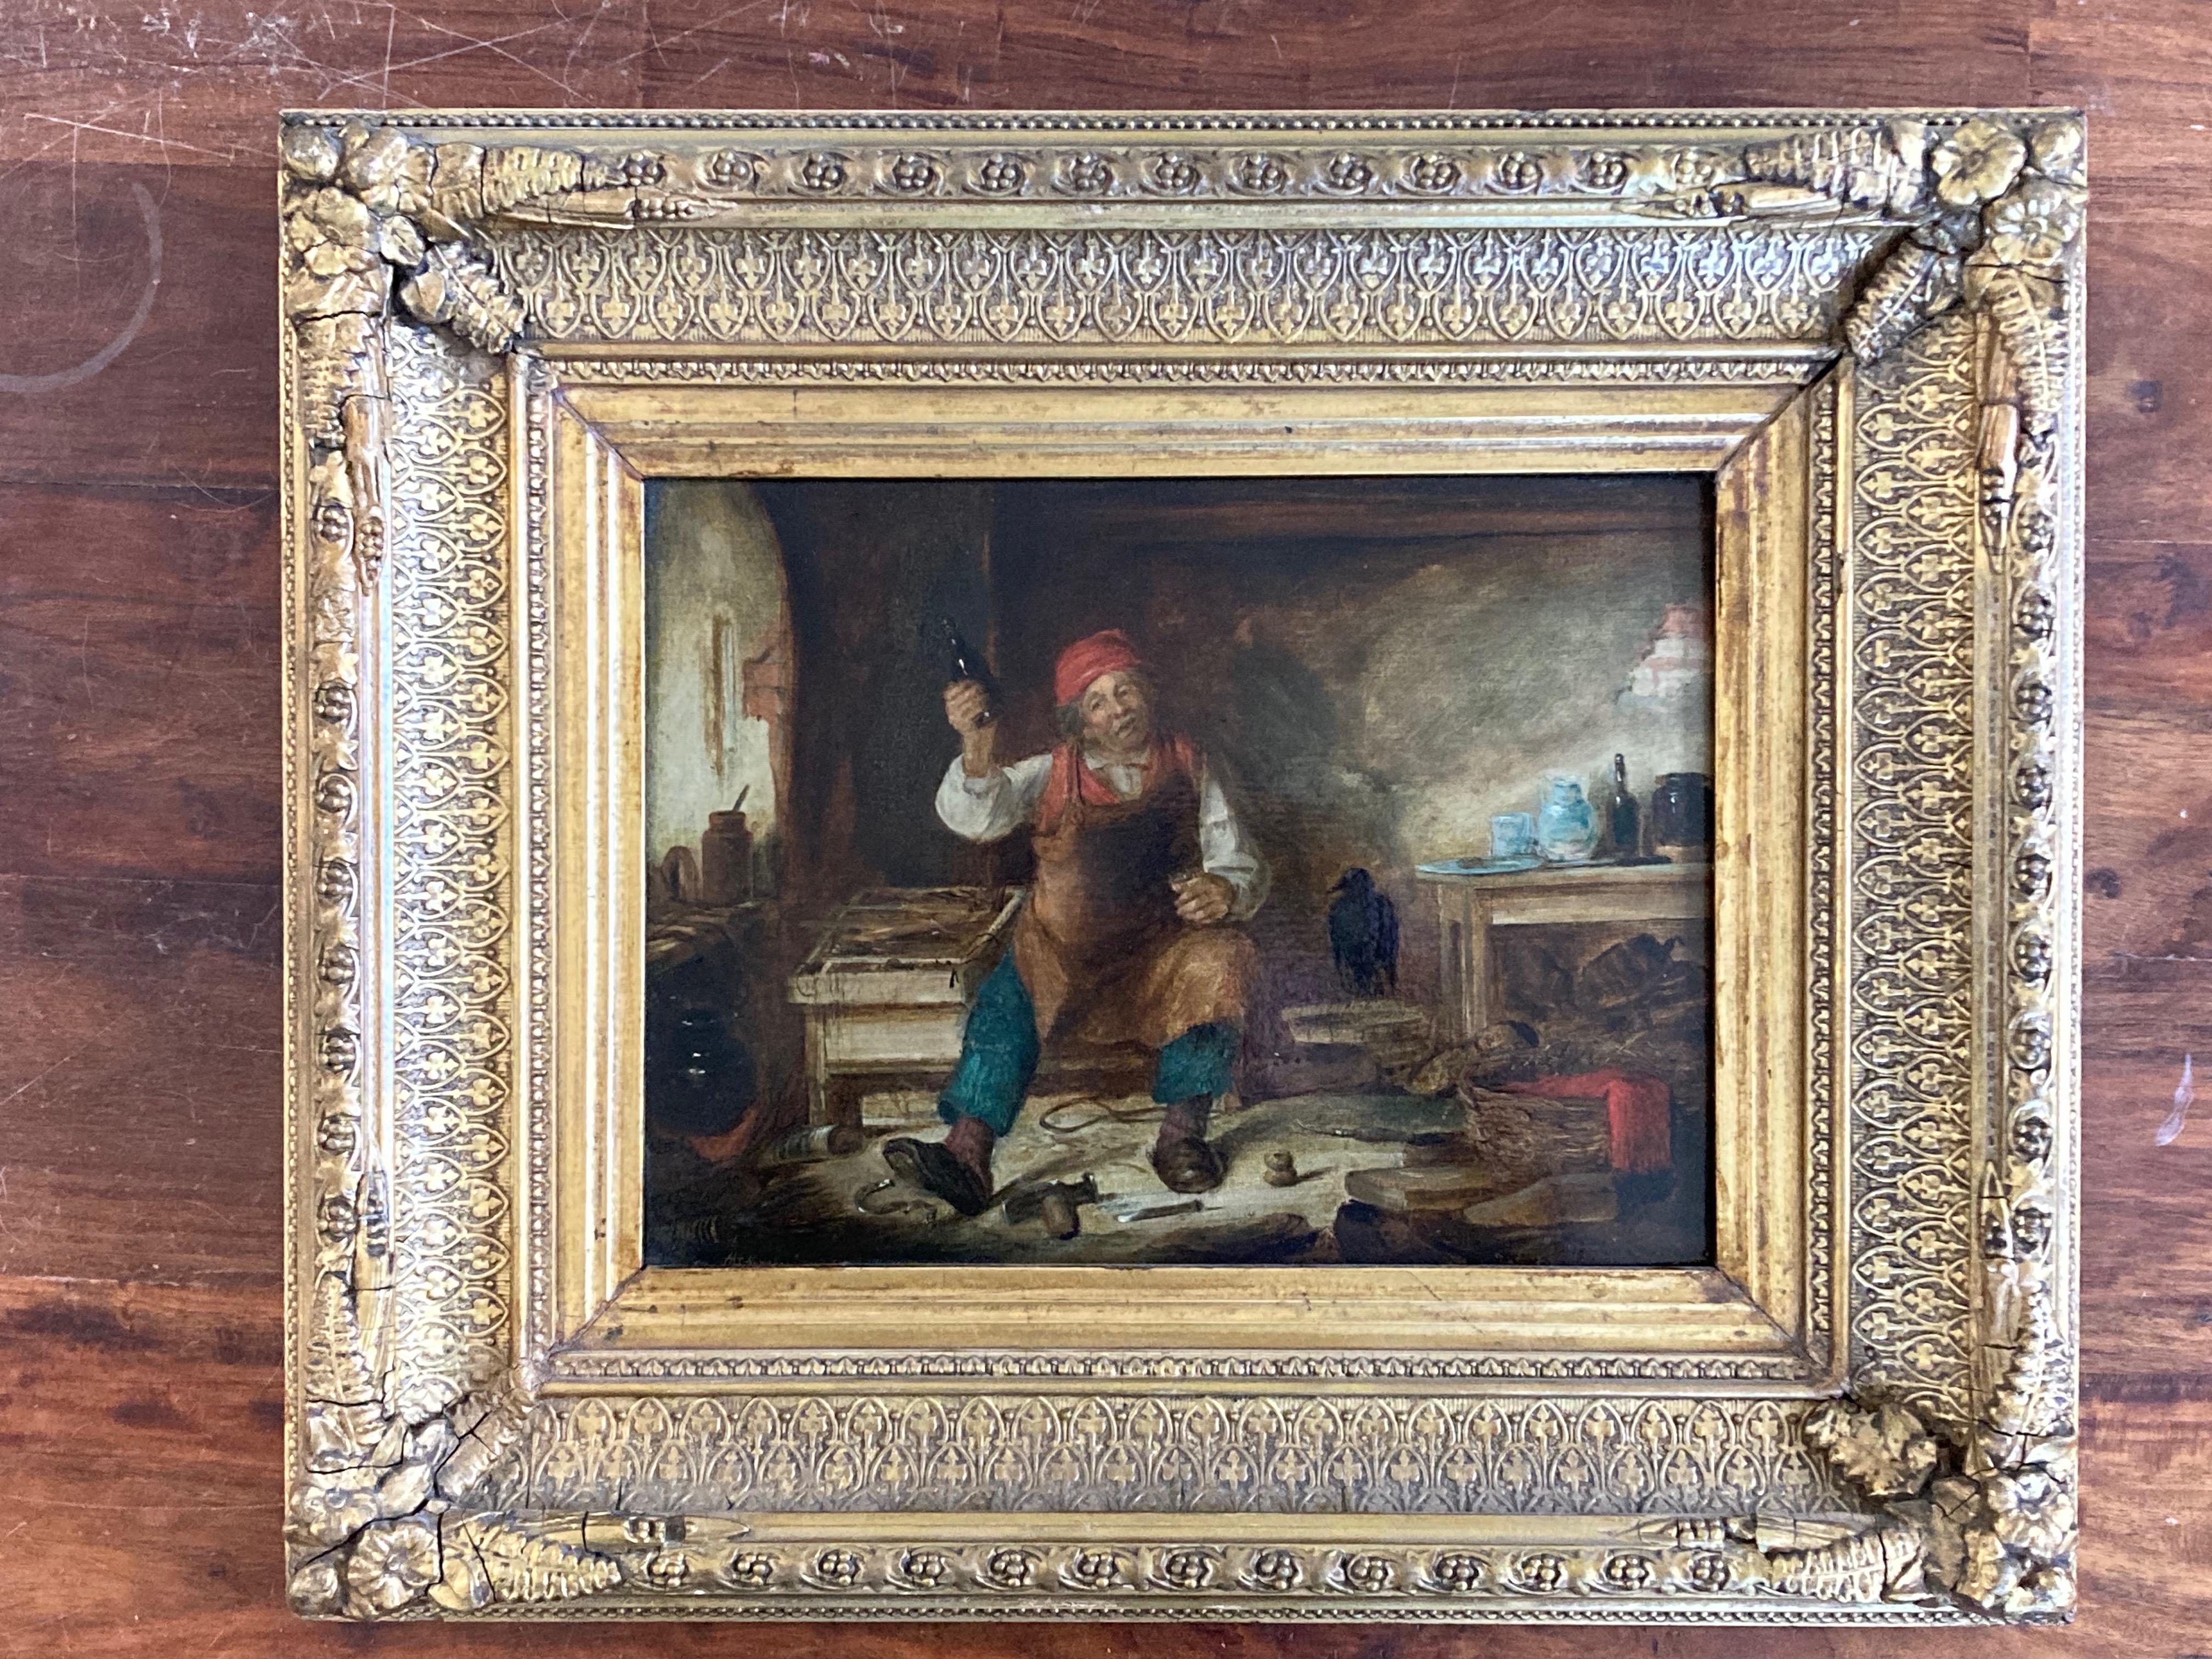 A very characterful image of a farrier or blacksmith enjoying a drink in an interior.

Alfred H Green (working 1844-1878)
A farrier in an interior enjoying a drink
Signed
Oil on board
9 x 12 excluding the frame
16¾ x 20 inches including the